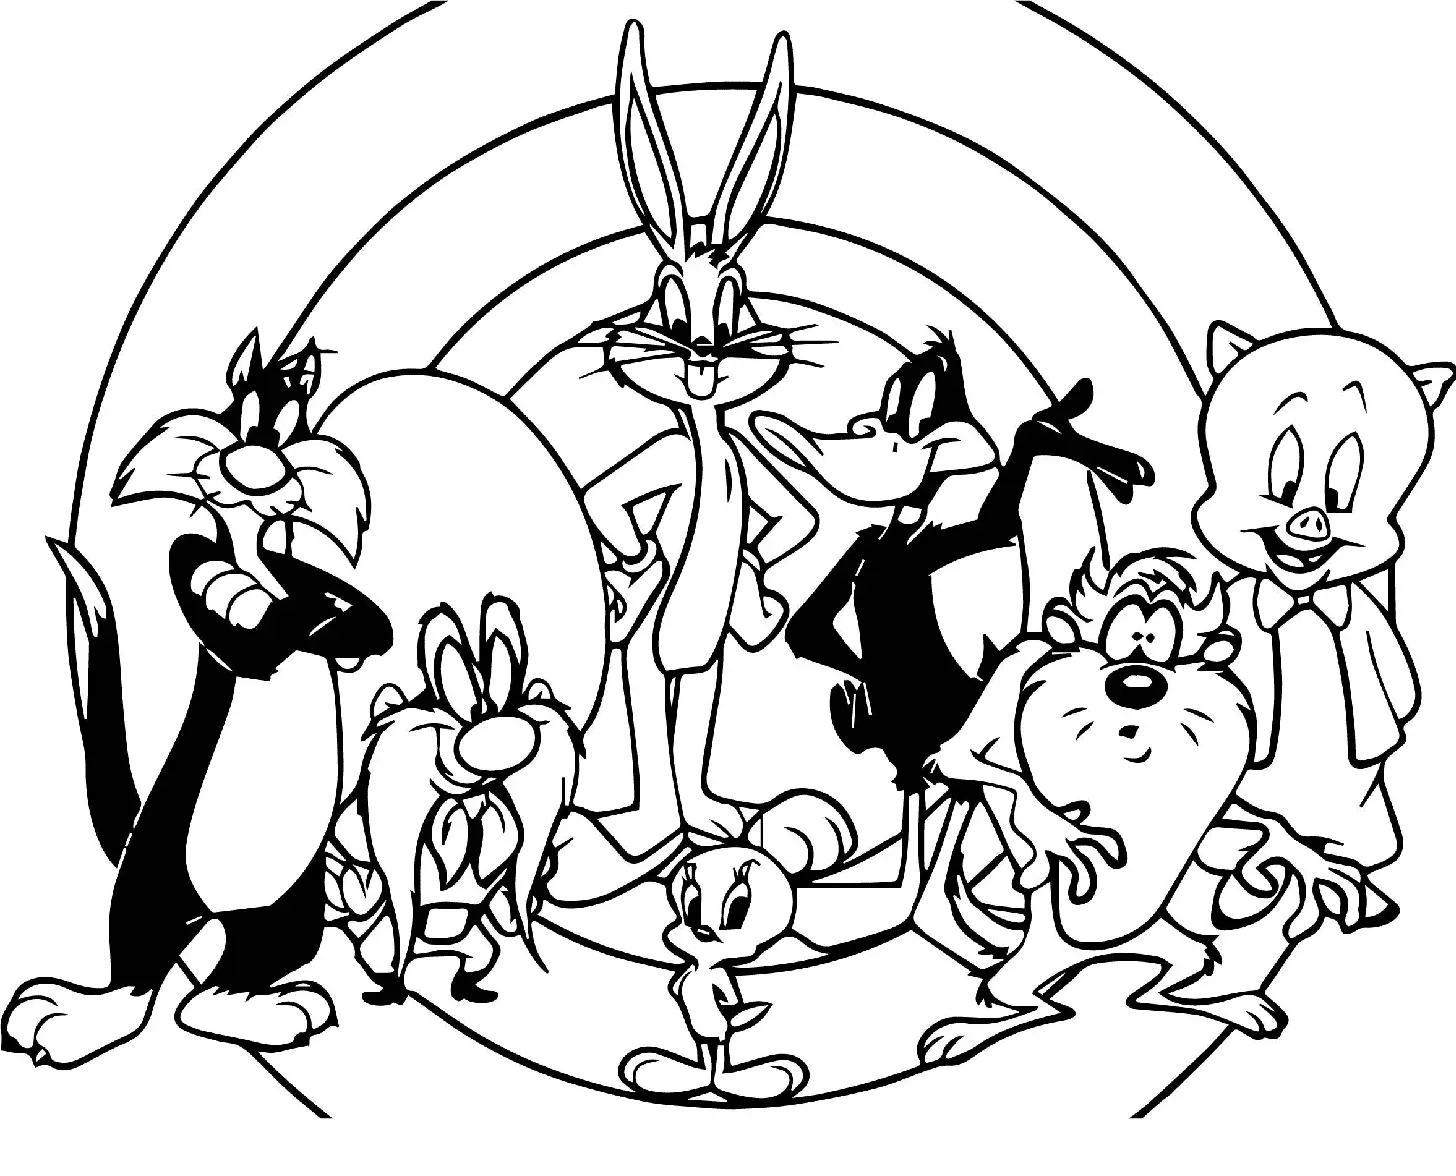 Looney Tunes Characters Coloring Pages